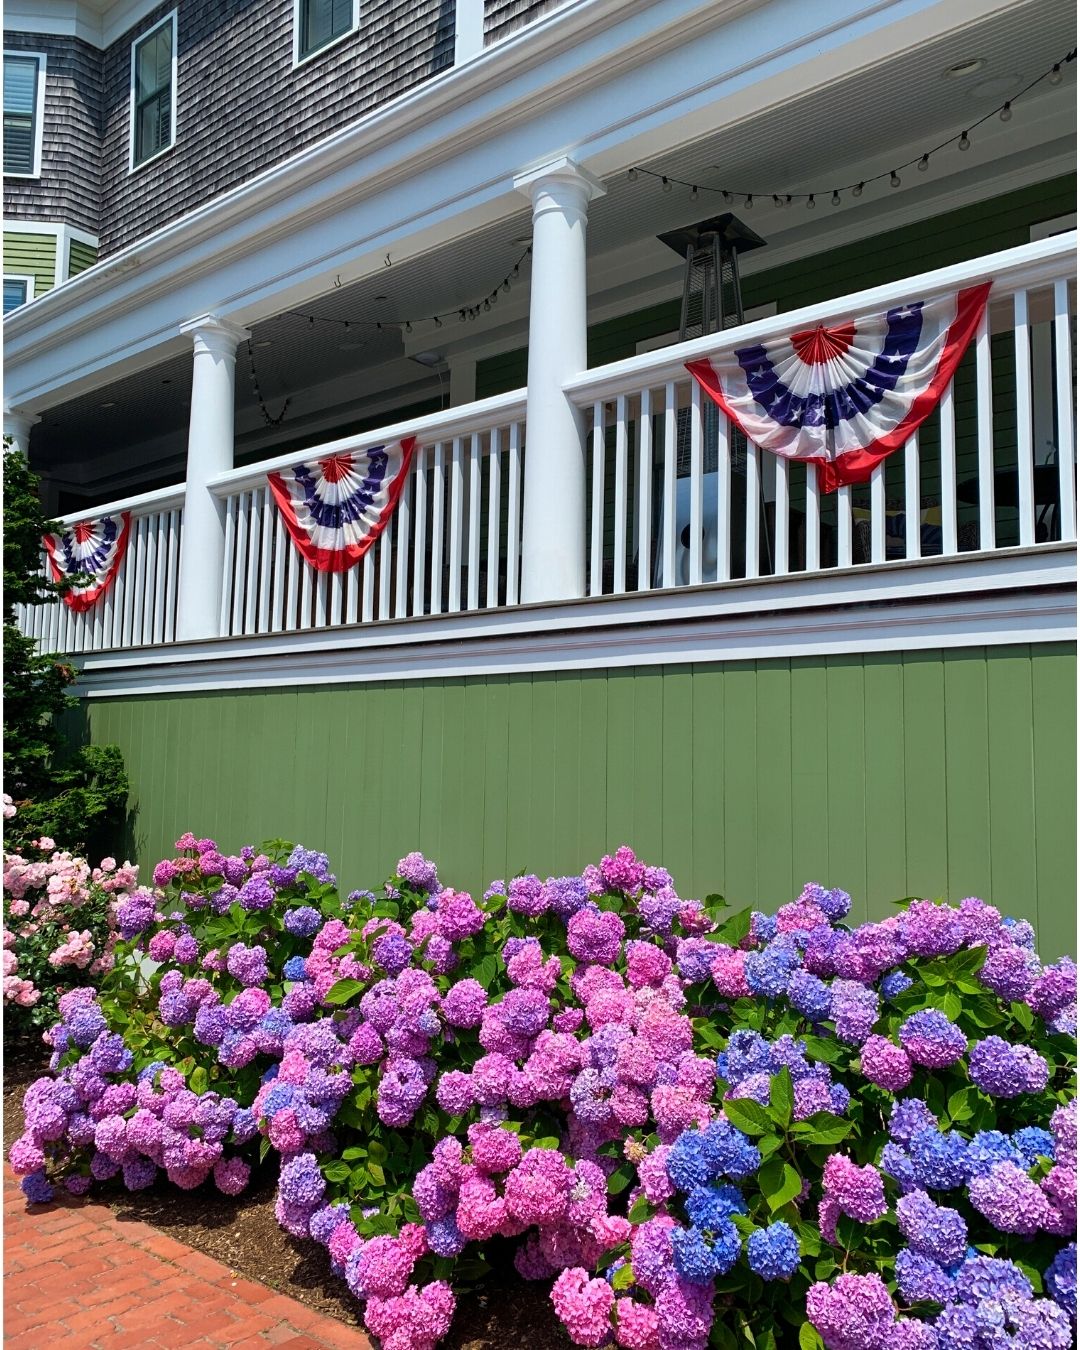 The Nantucket Hotel and Resort is a great choice when looking for places to stay on the island of Nantucket, MA